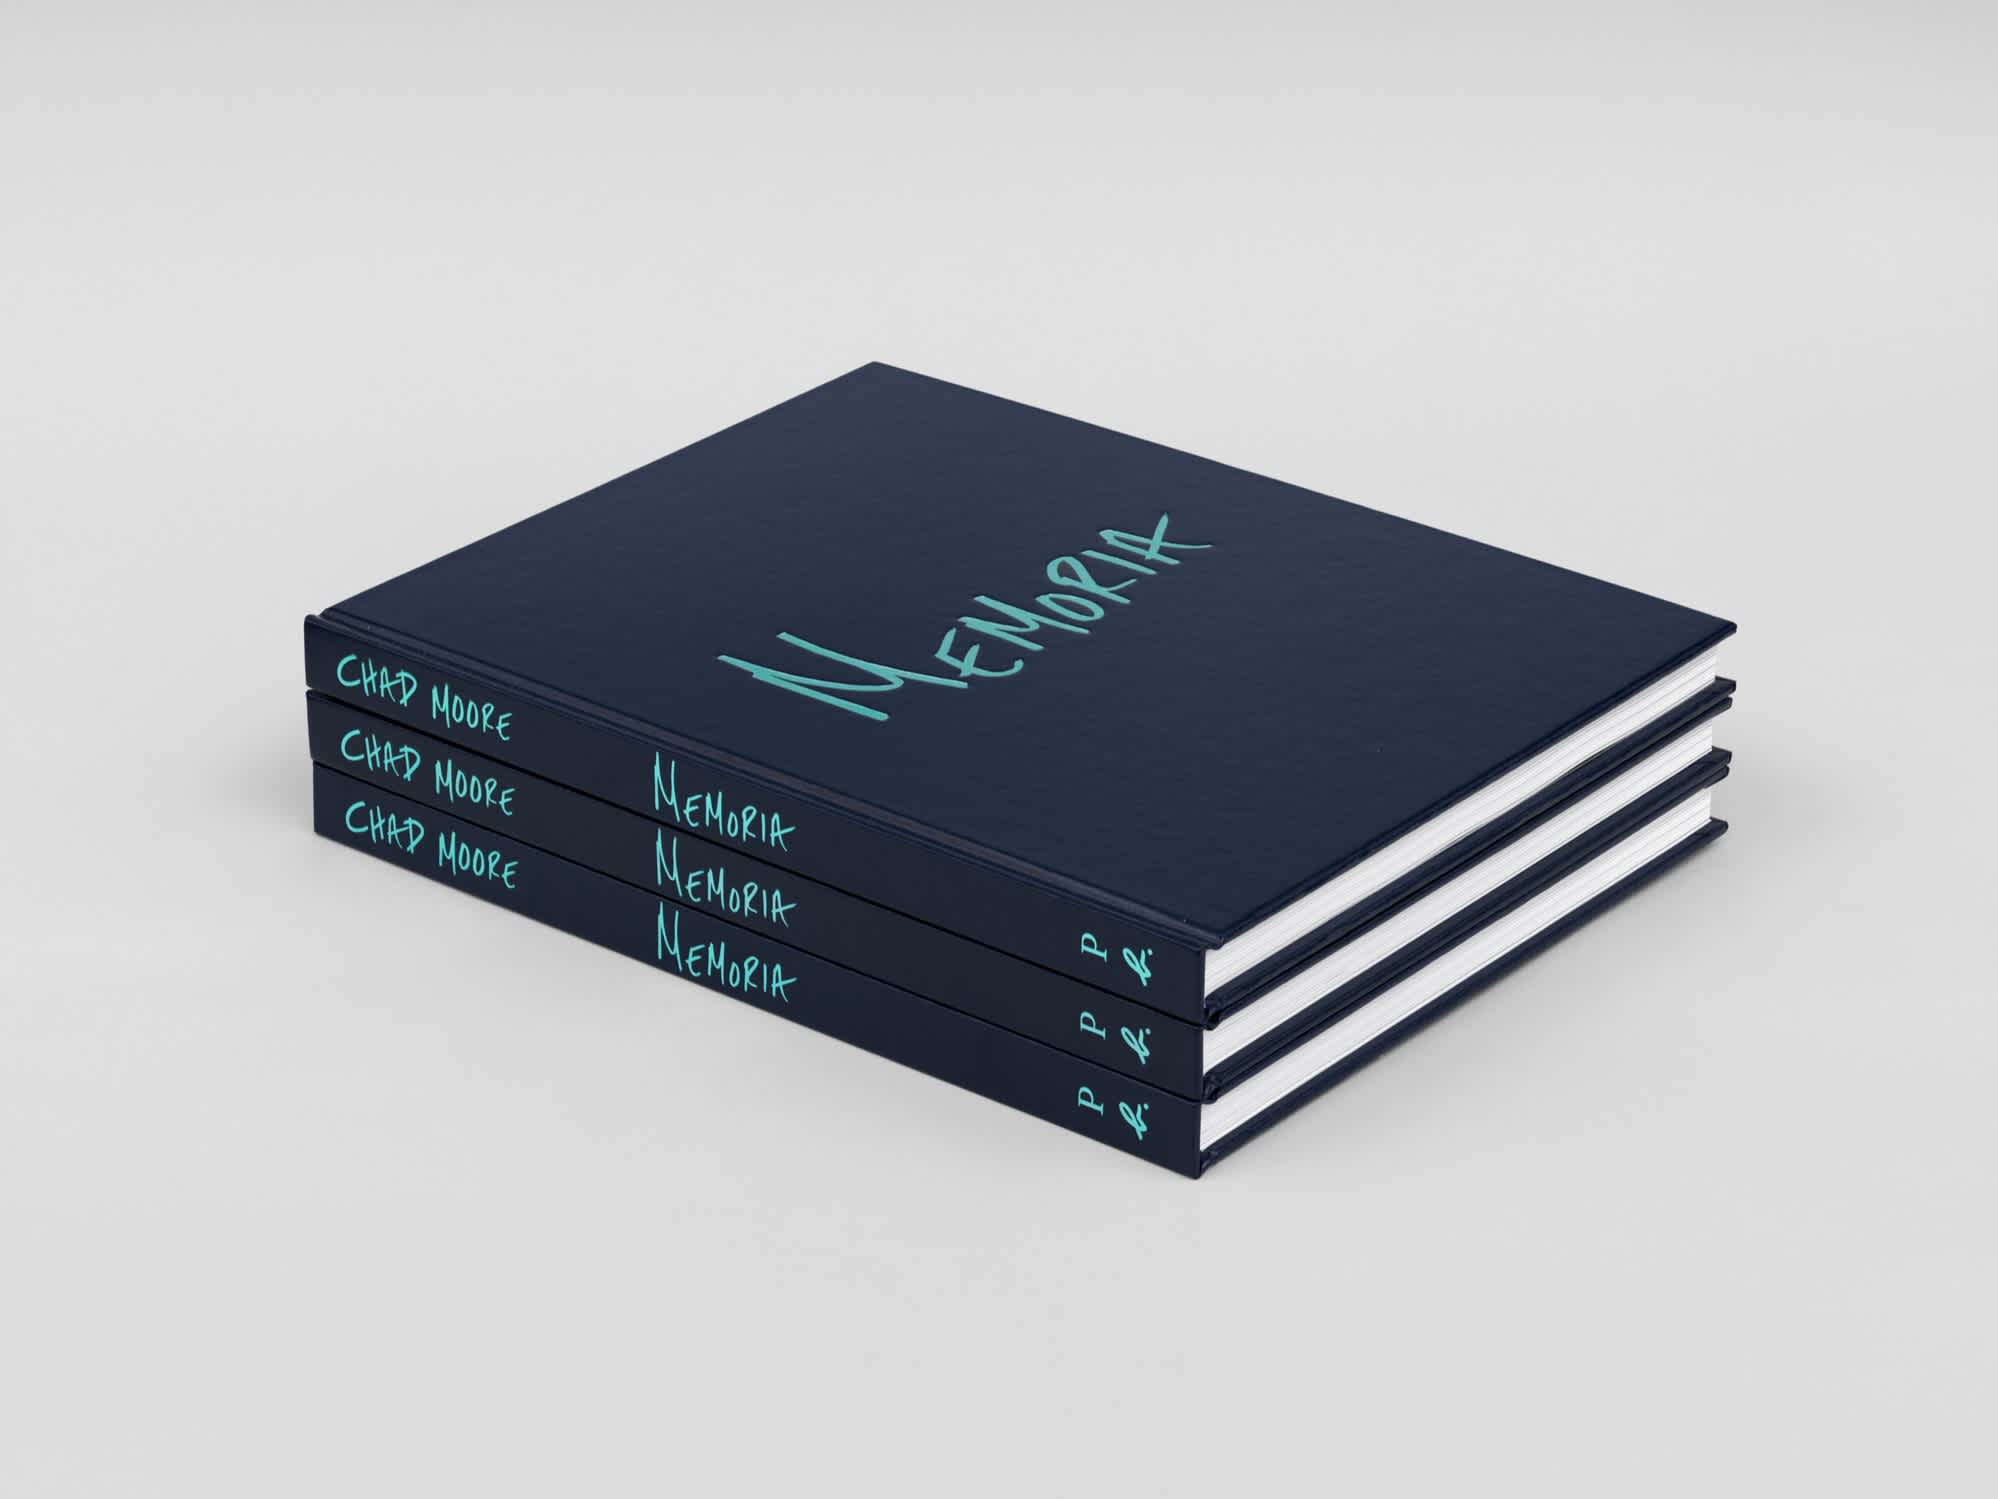 Three navy blue books with light blue text on the cover and spine, aligned on top of each other.